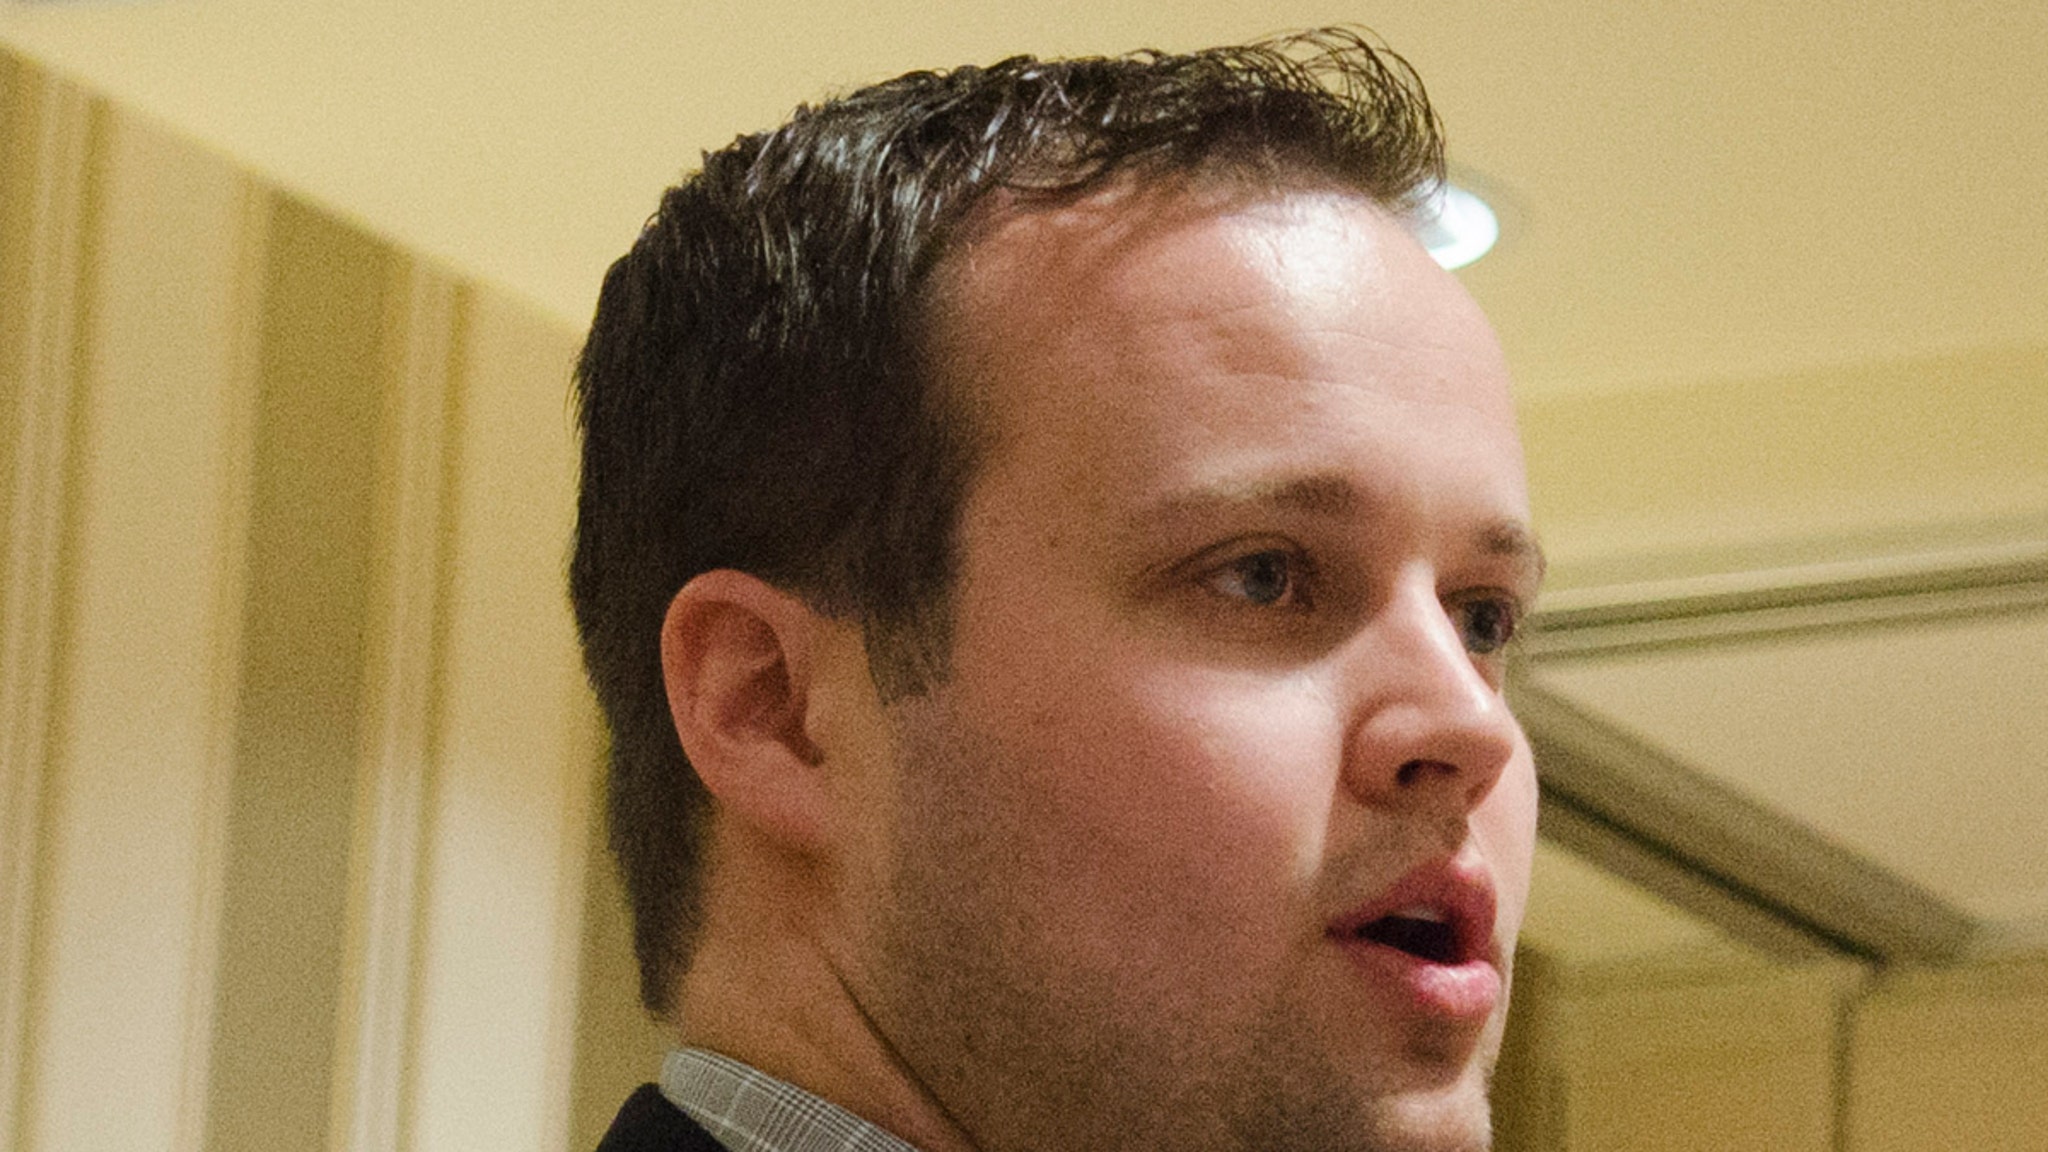 Josh Duggar's military-style life behind bars with chores and strict rules